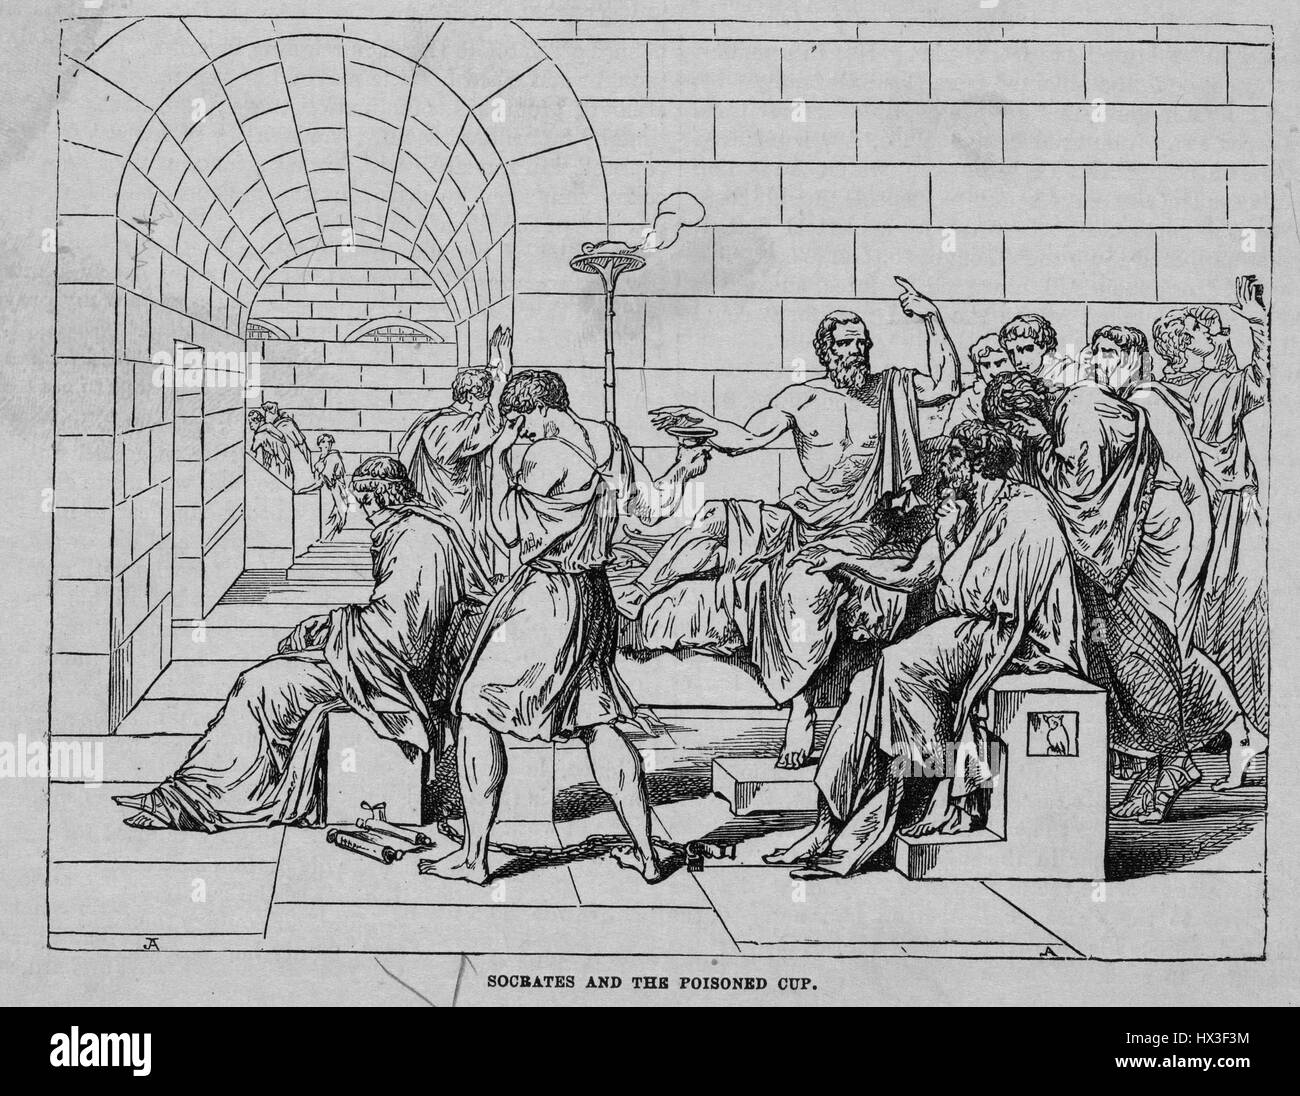 Artistic depiction of the death of Socrates, showing Socrates about to drink poison and using the moment as a lesson for his pupils, 1874. From the New York Public Library. Stock Photo